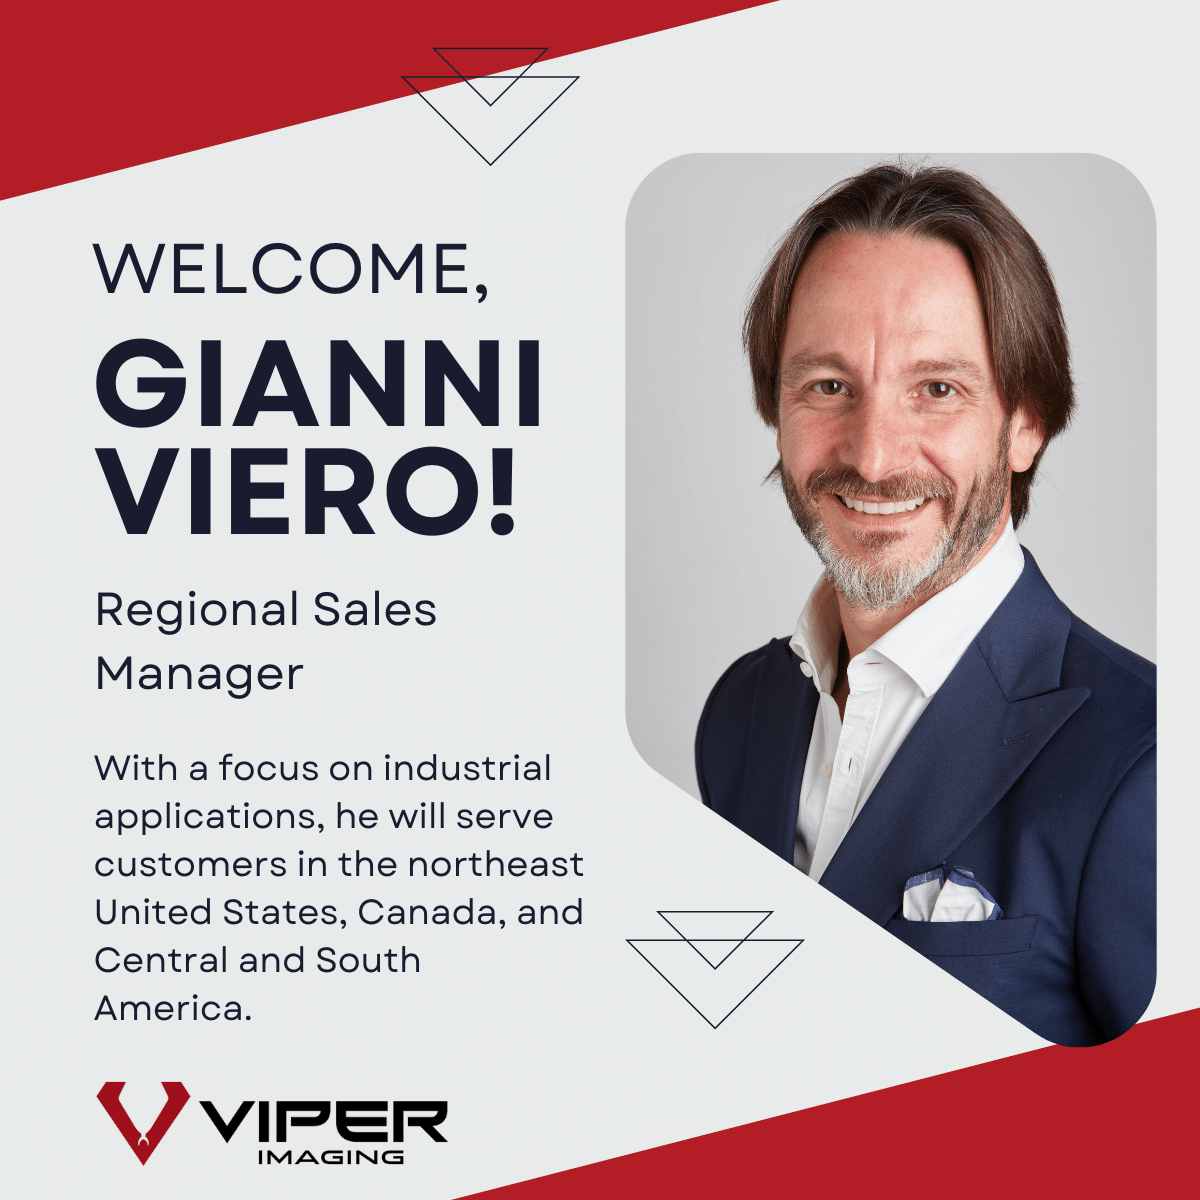 Gianni Viero, Regional Sales Manager for Viper Imaging